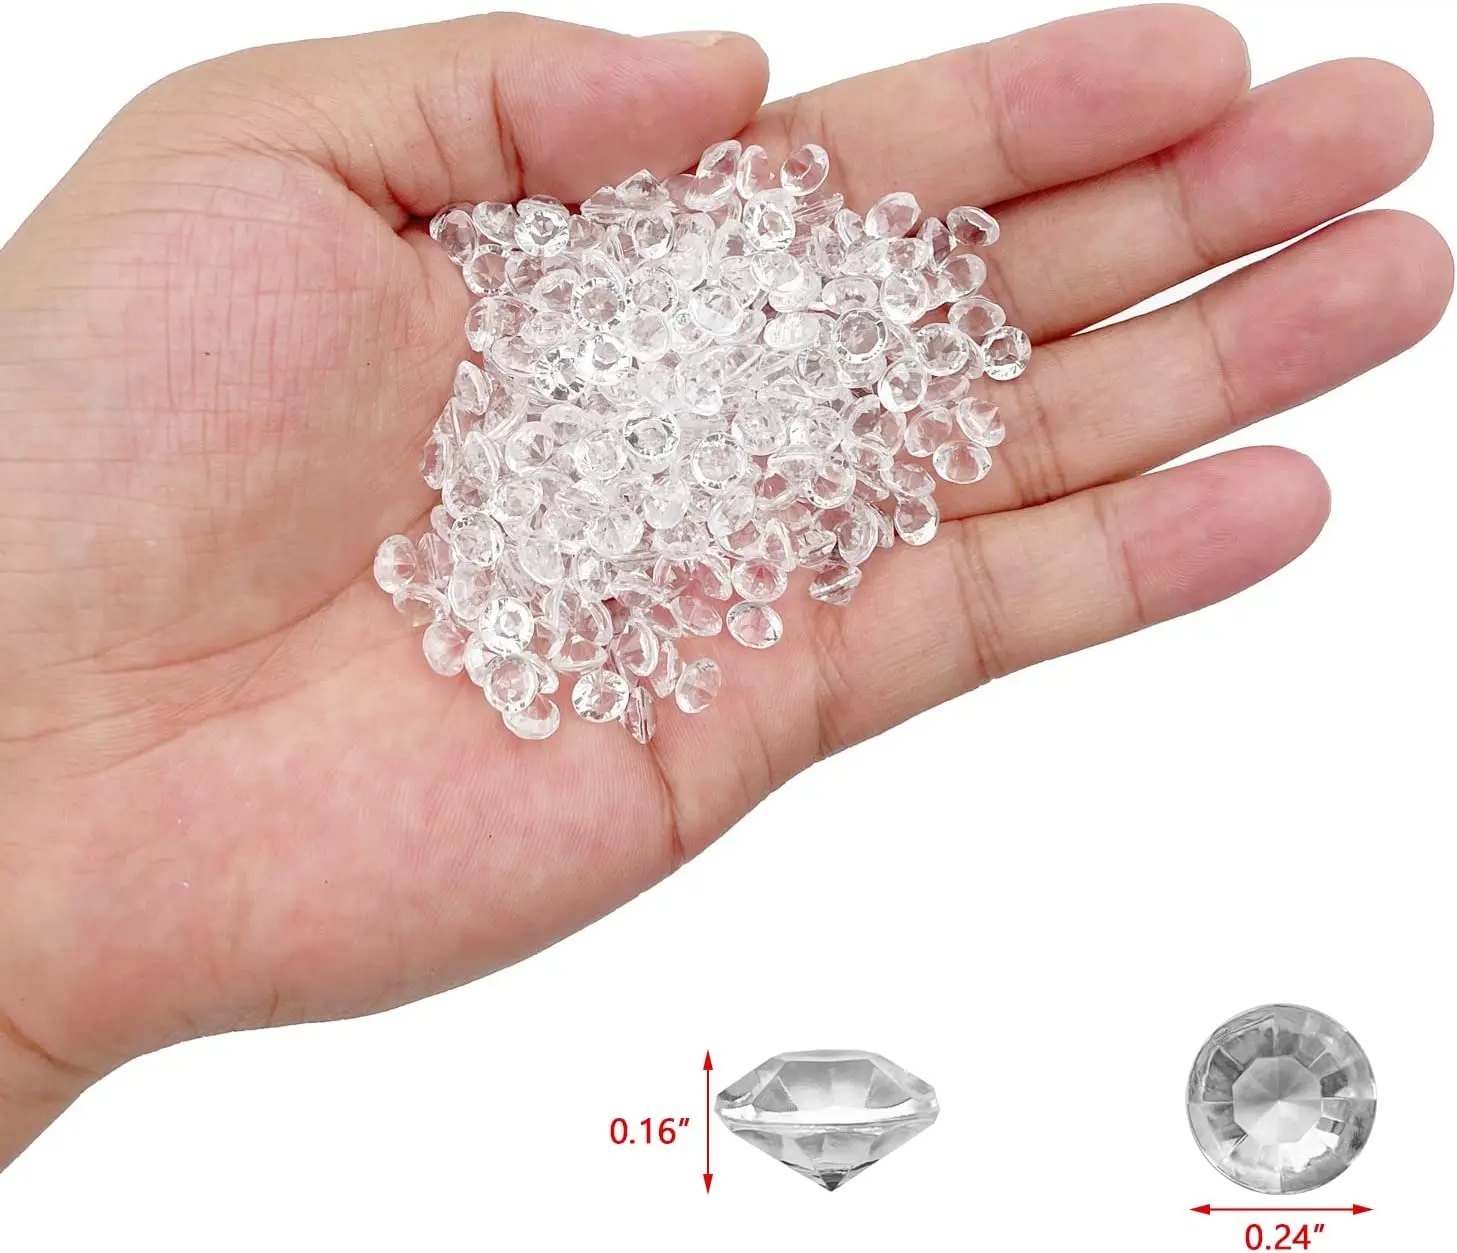 

6000PCS 0.24inch Clear Acrylic Diamonds Rhinestones Crystals Gems for Vase Fillers,Table Scatter, Party Favor Wedding Decoration